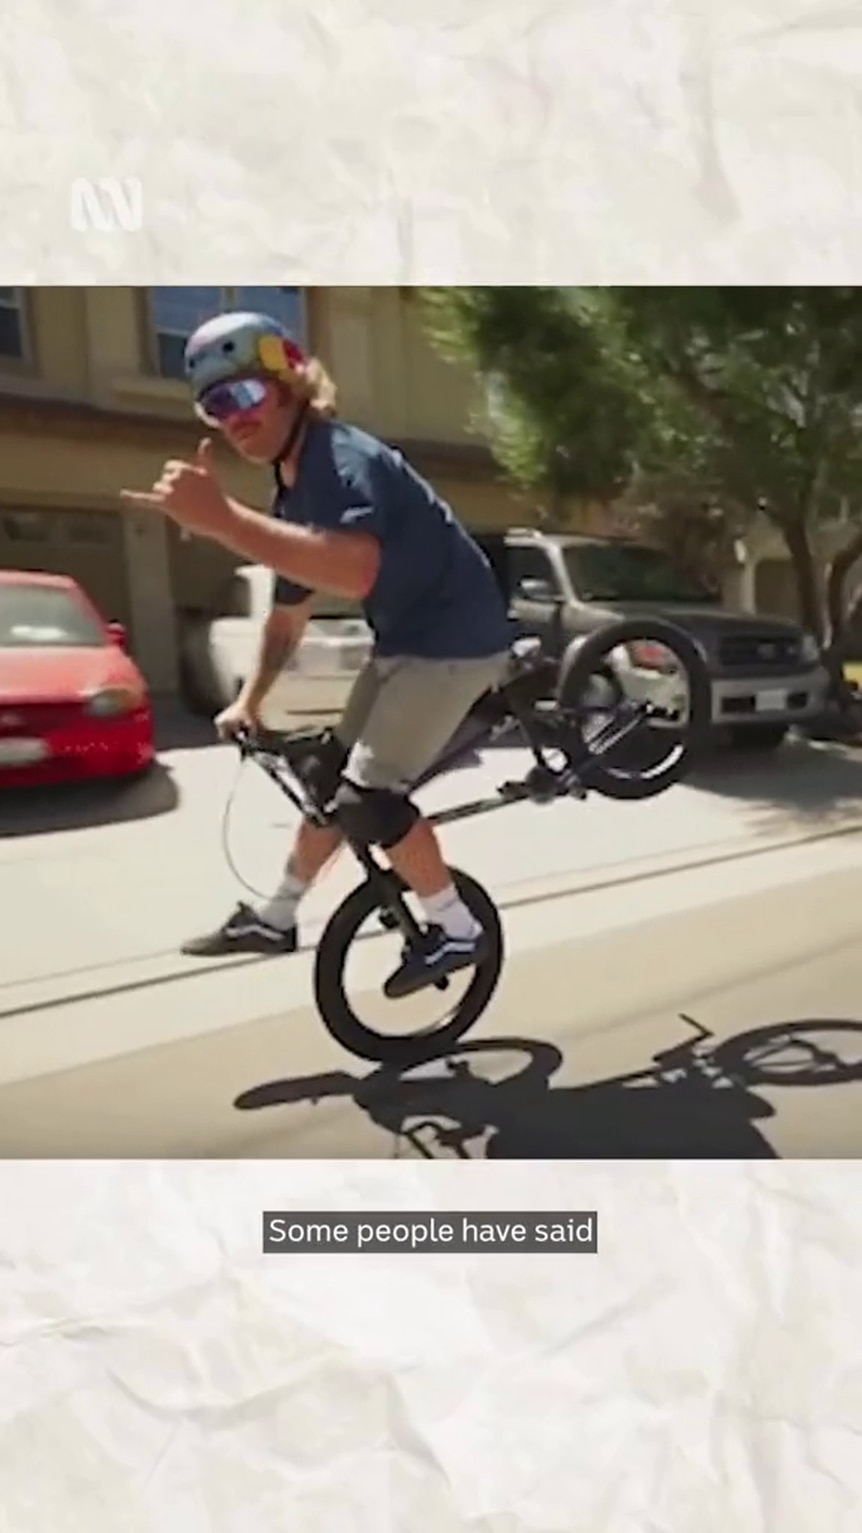 Young man rolls on front wheel of BMX while doing the shaka with one hand and steering with the other